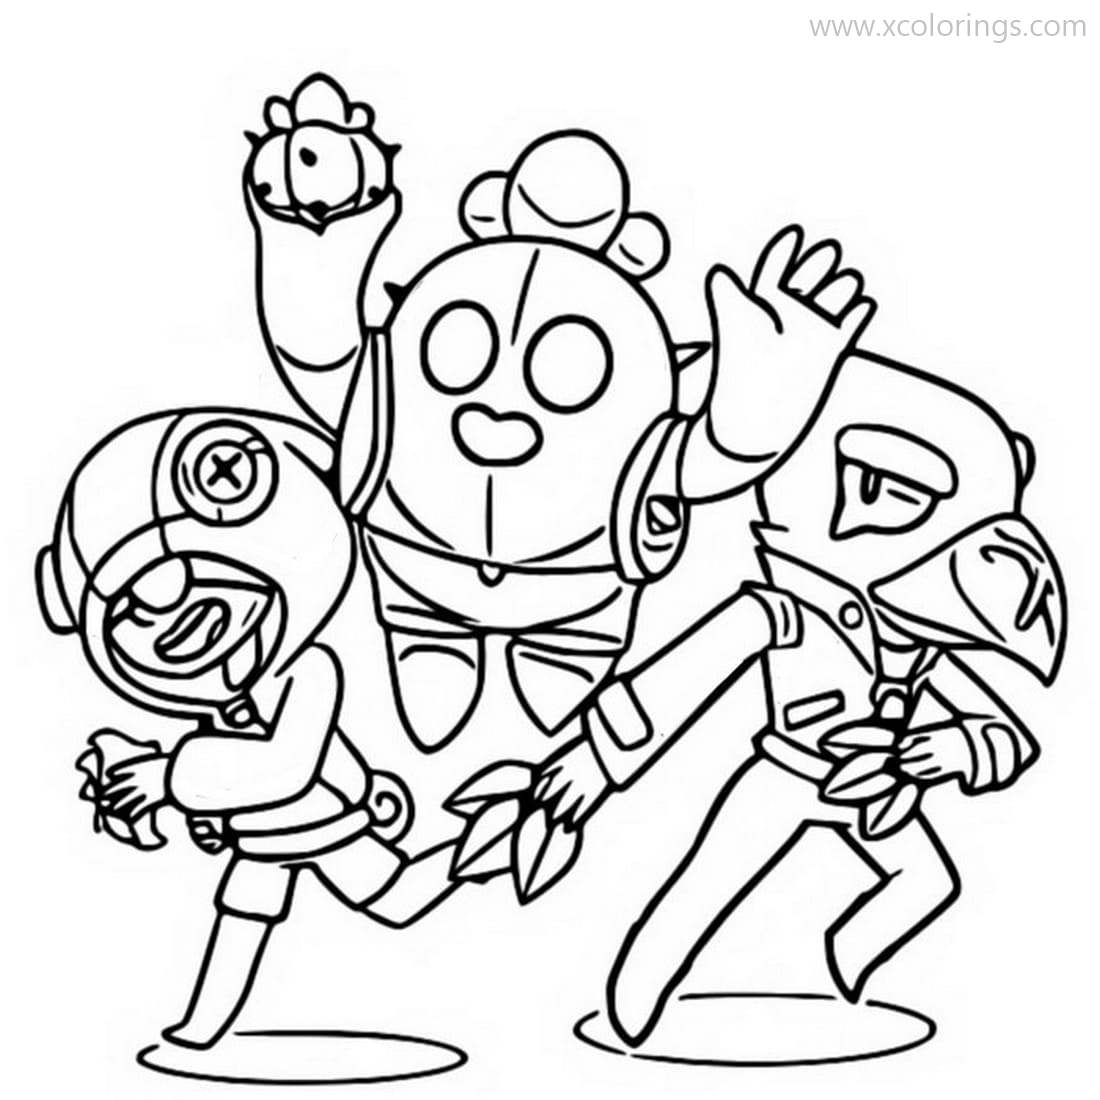 Free Group Duel from Brawl Stars Coloring Pages printable